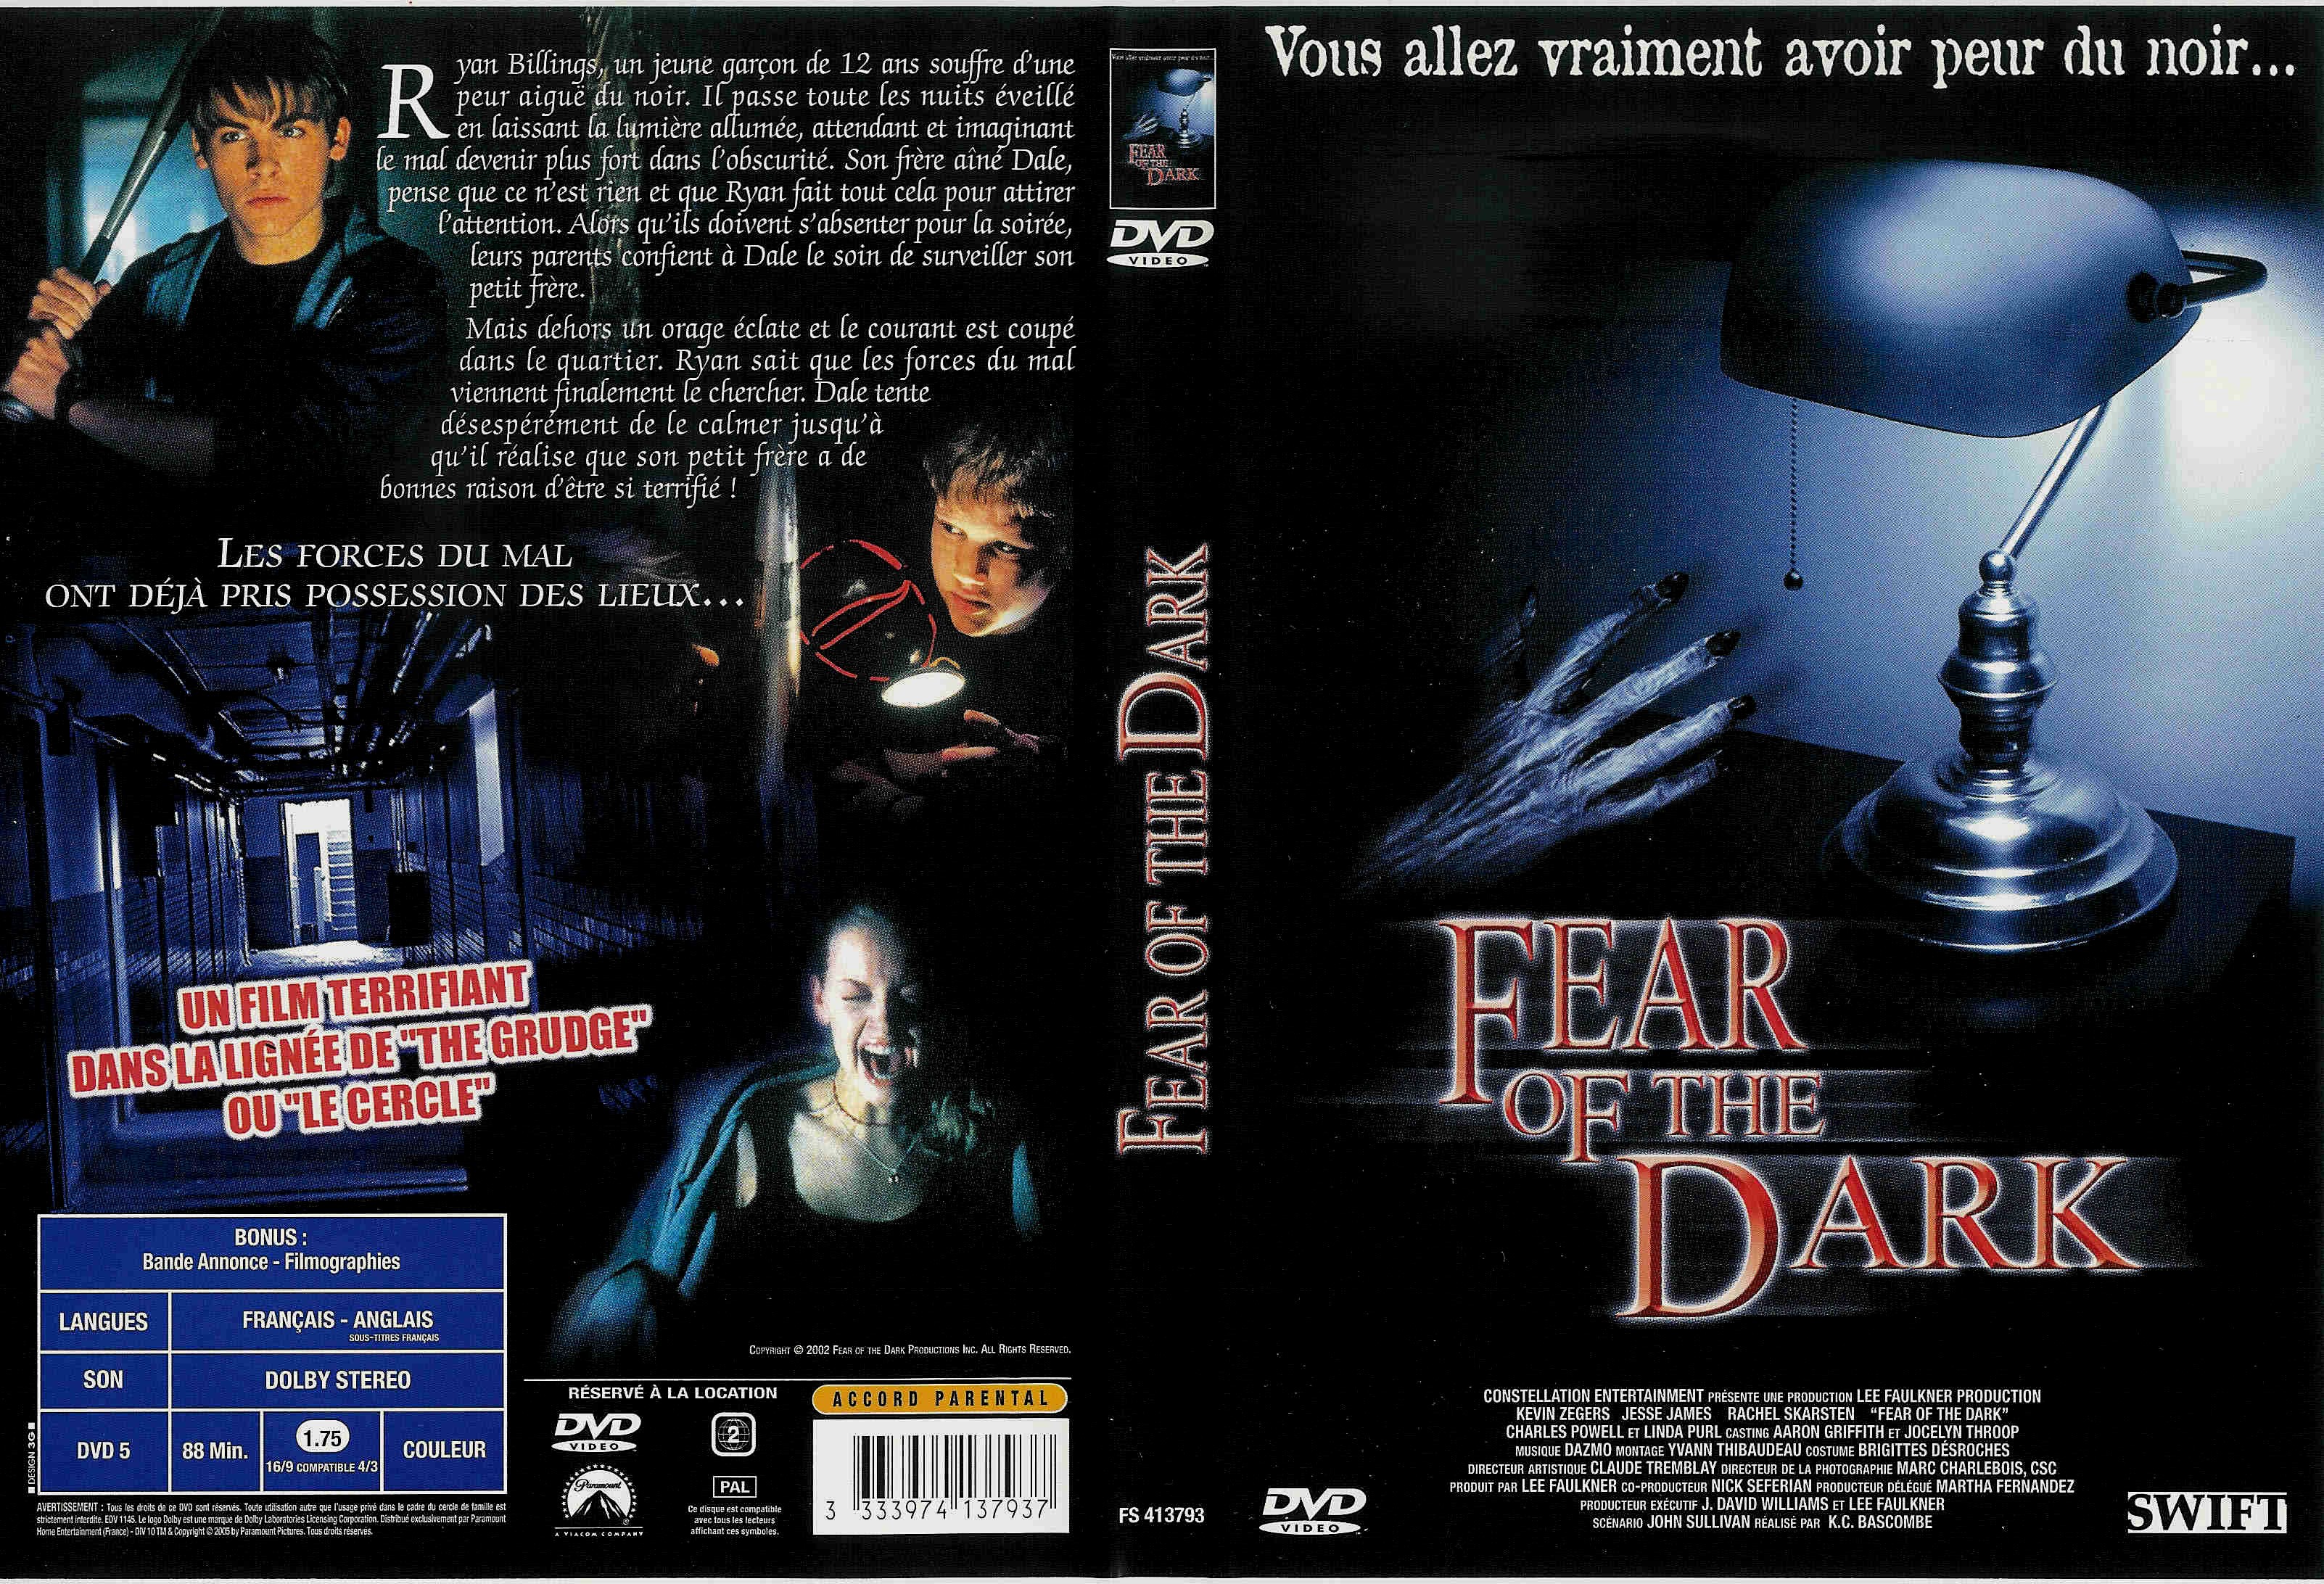 Jaquette DVD Fear of the dark